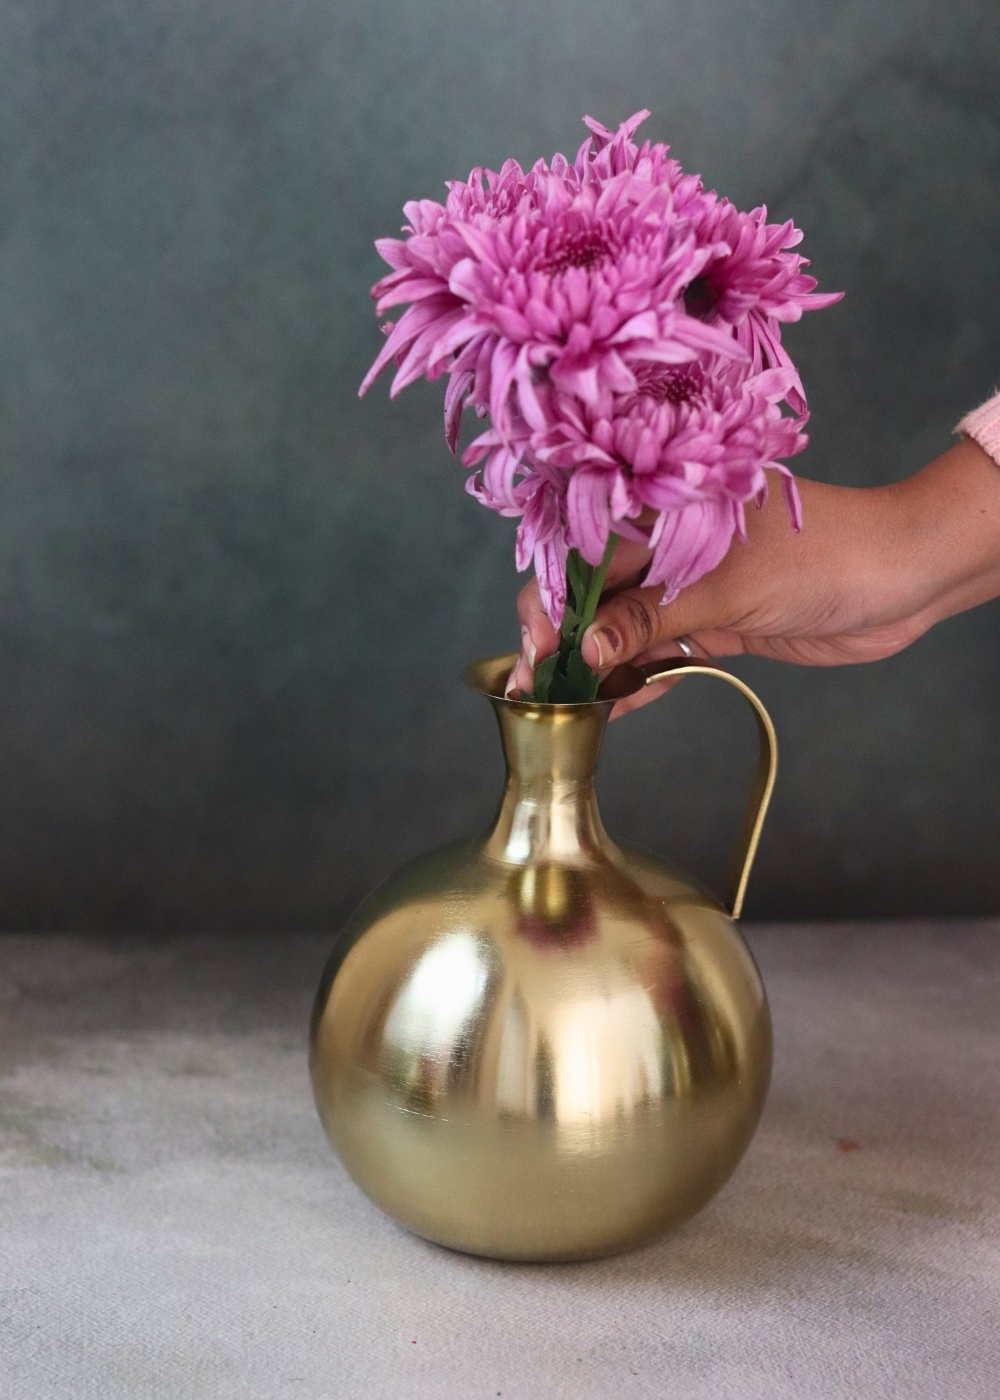 Brass mughal vase with flowers on hand